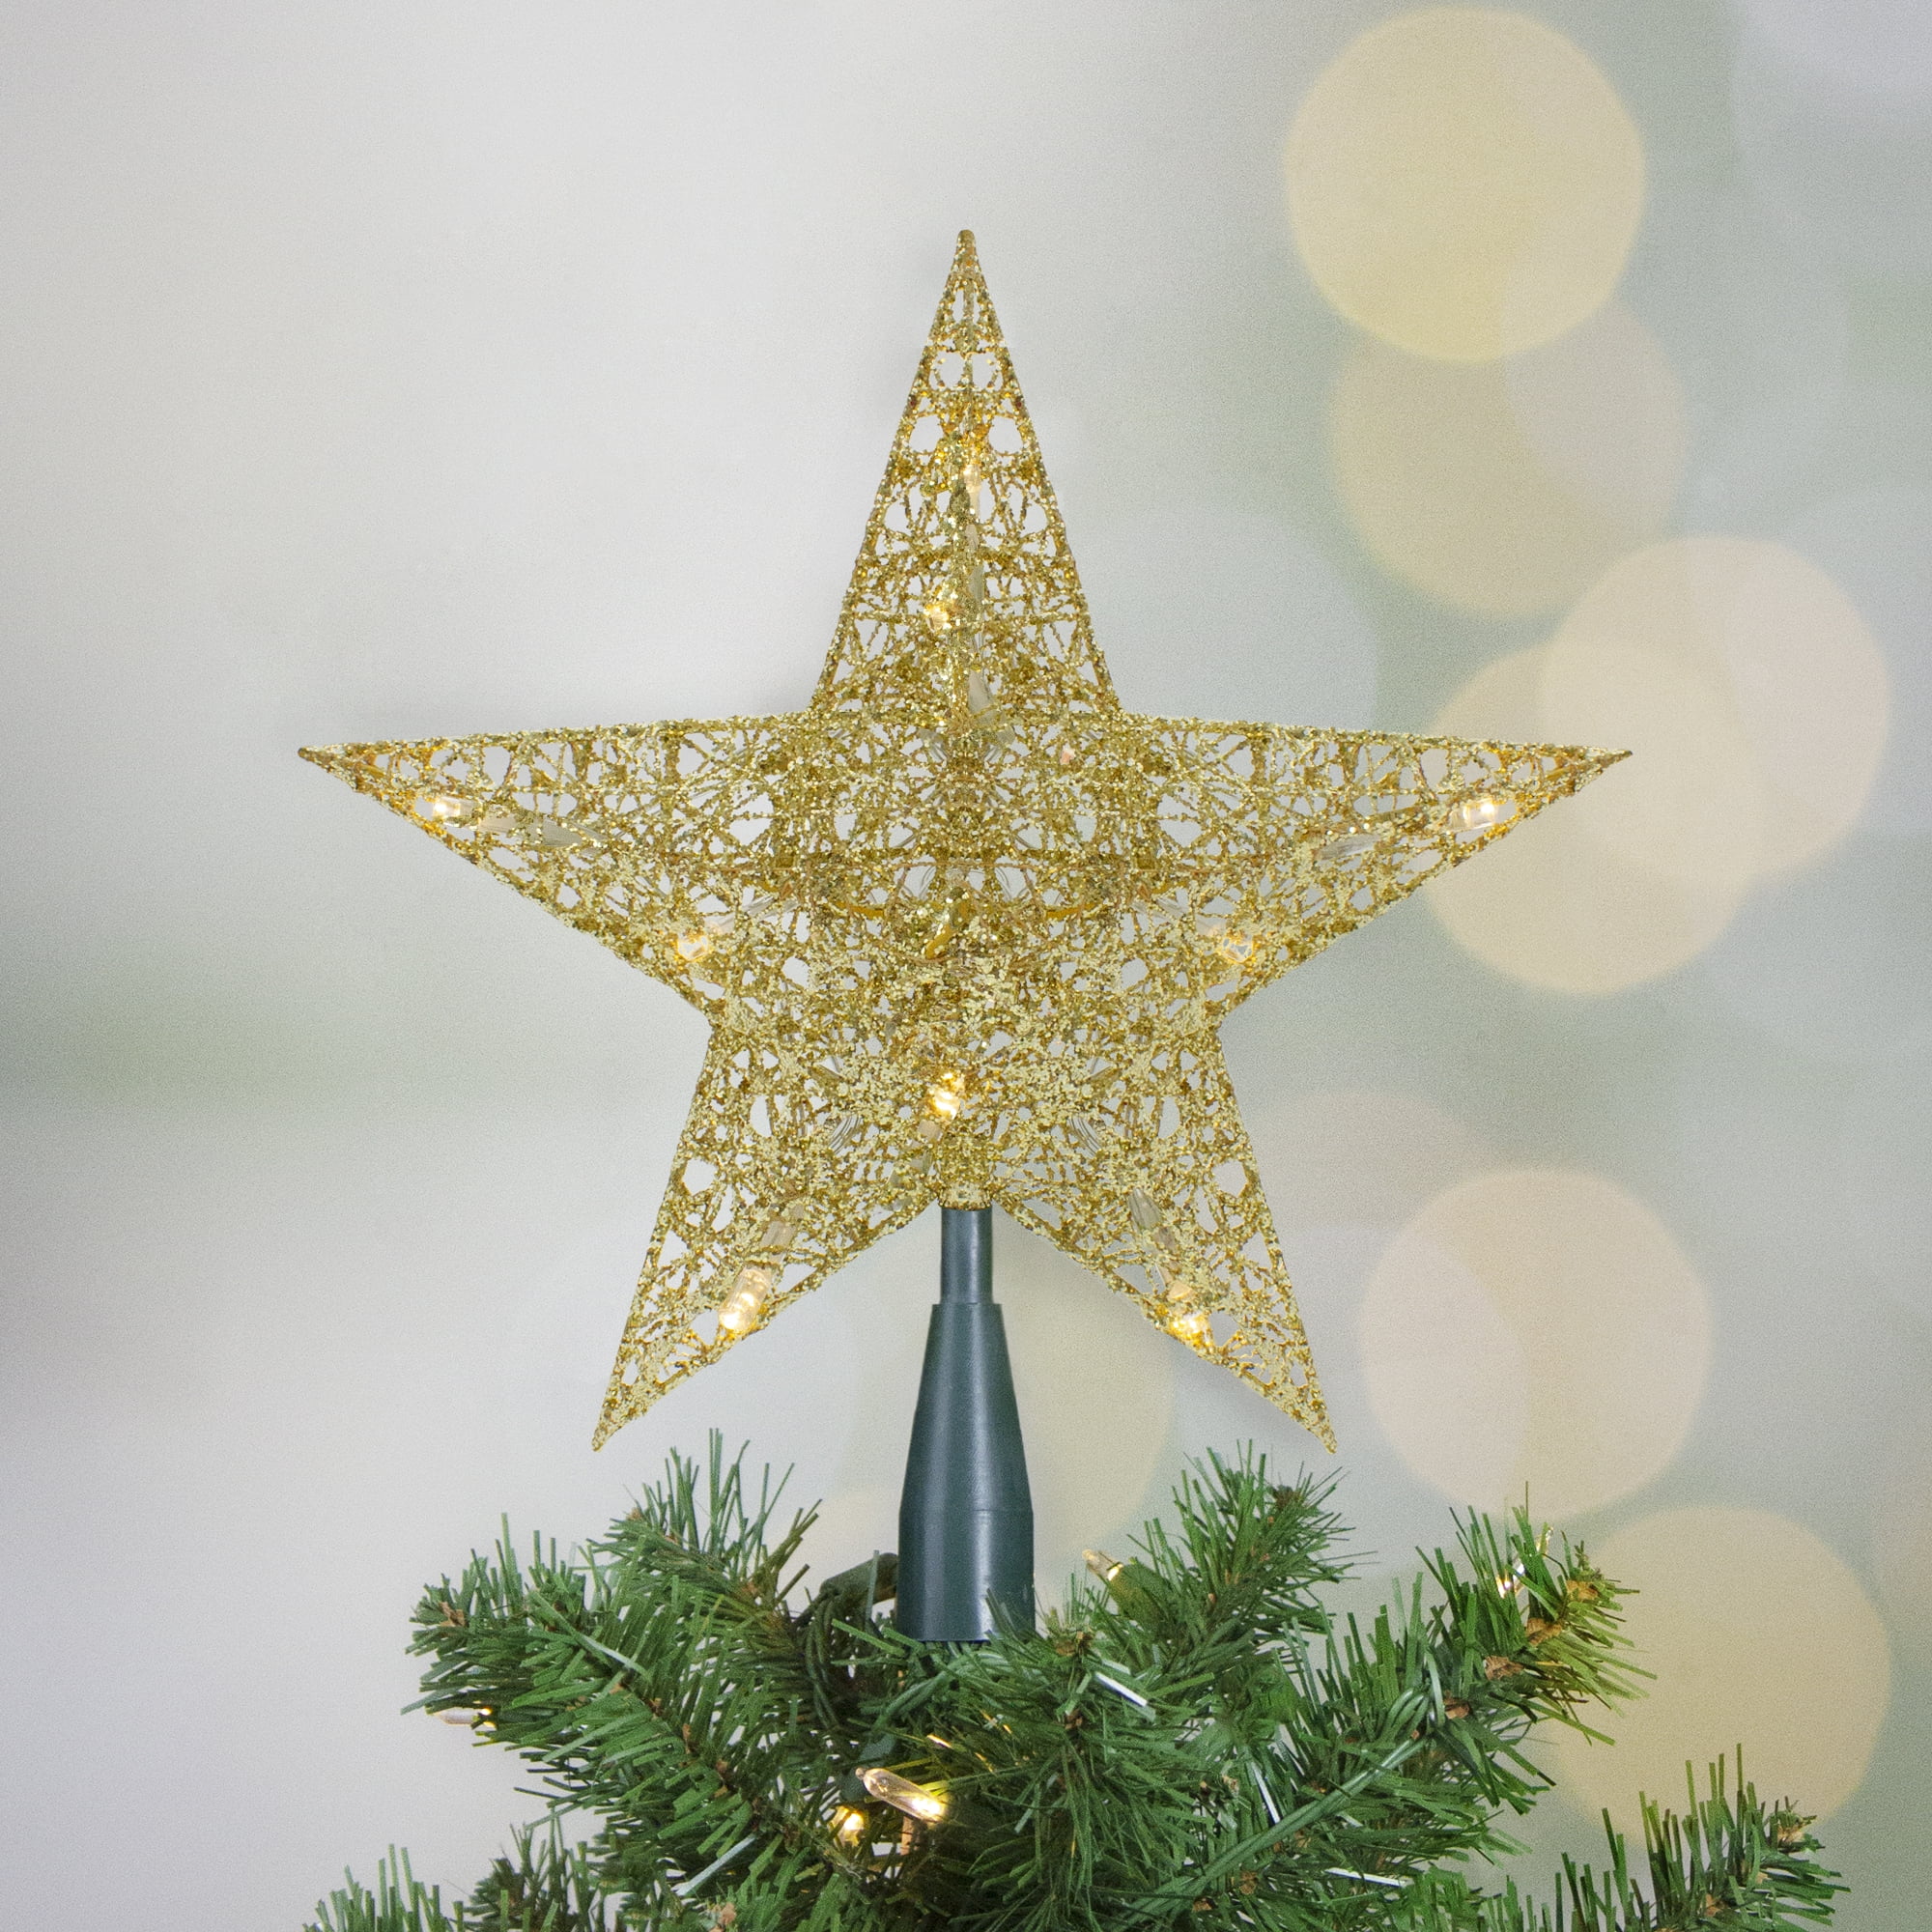 X Large GOLD/AMBER Ceramic Christmas Tree Star Topper 4" tall **FREE SHIP** 